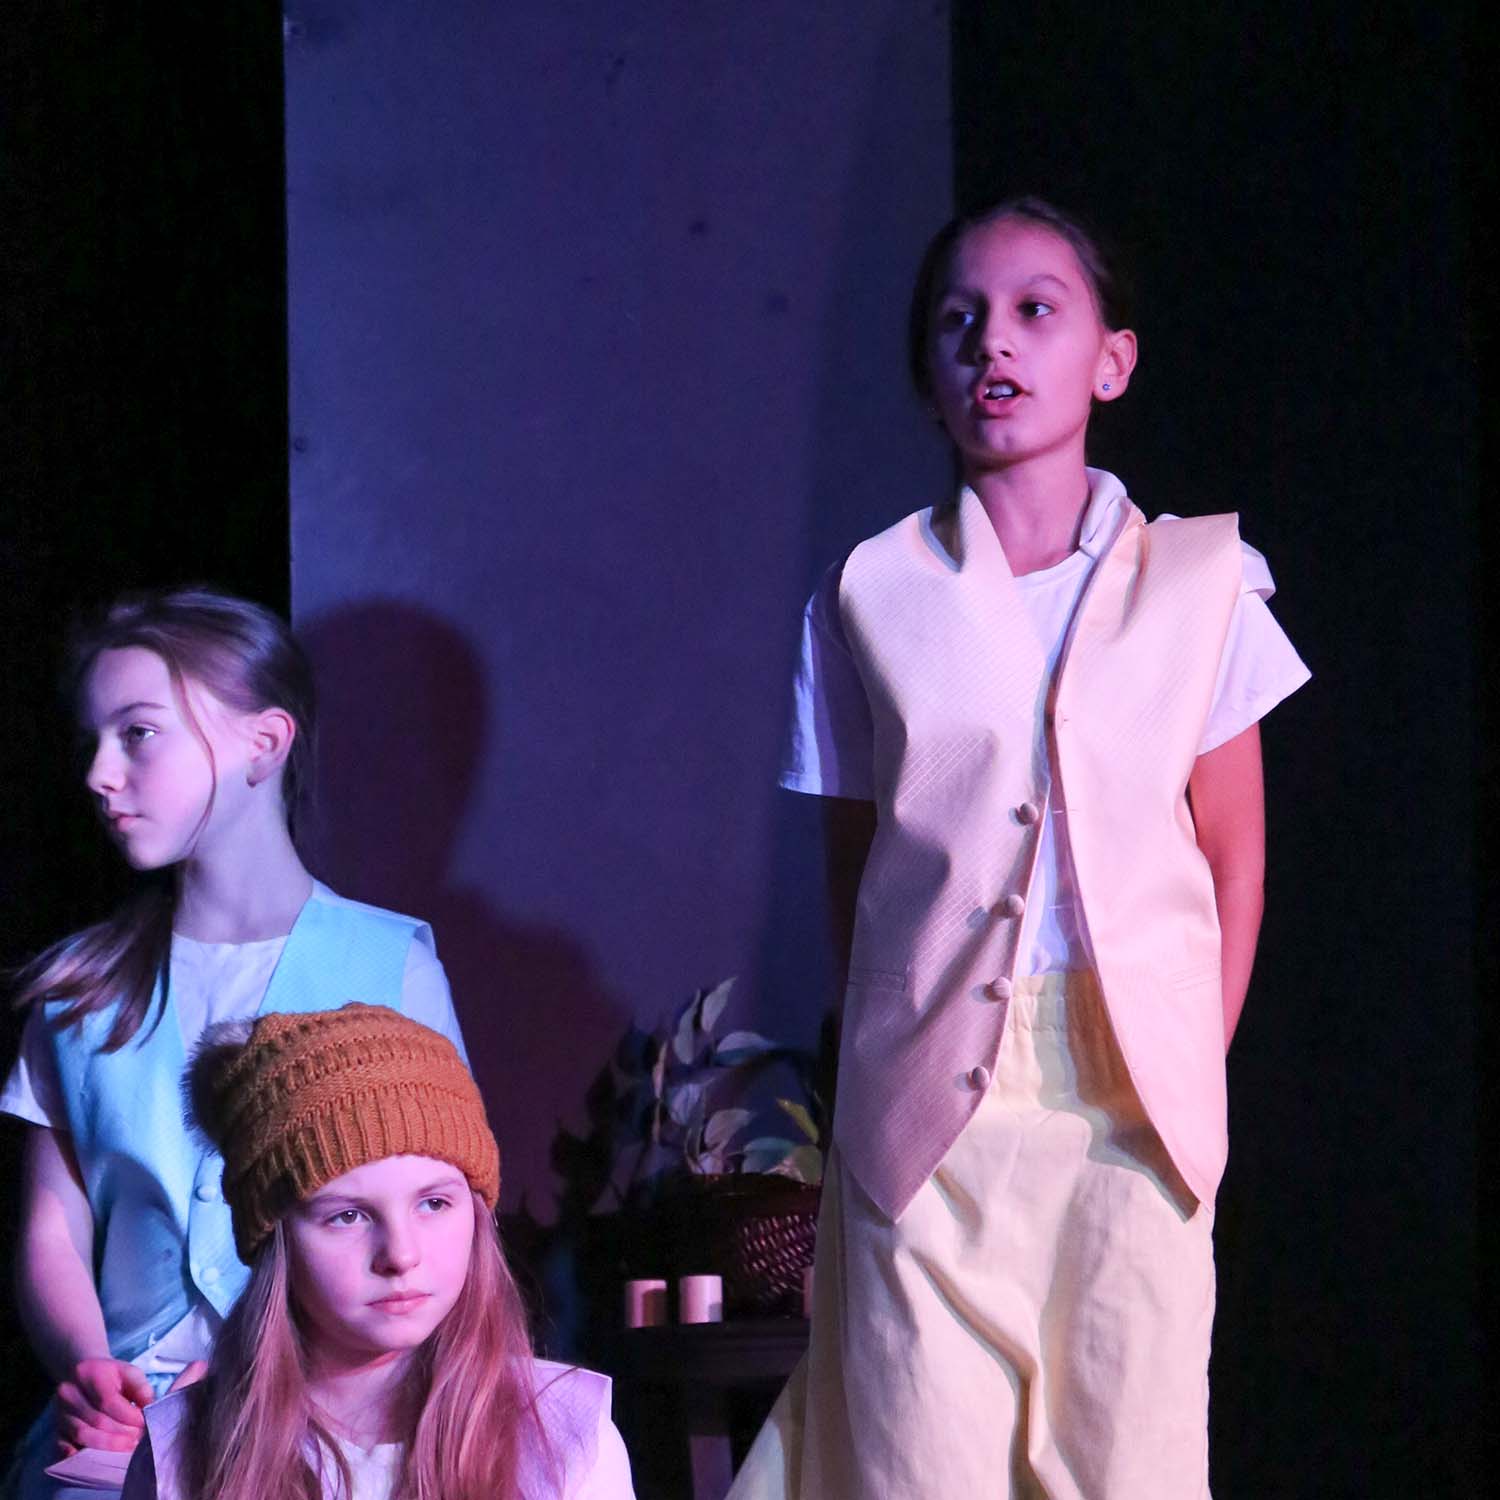 Image shows children on stage performing a play in Bellingham, WA. Image is promoting the ability for kids to do youth drama and childrens theater in Whatcom County